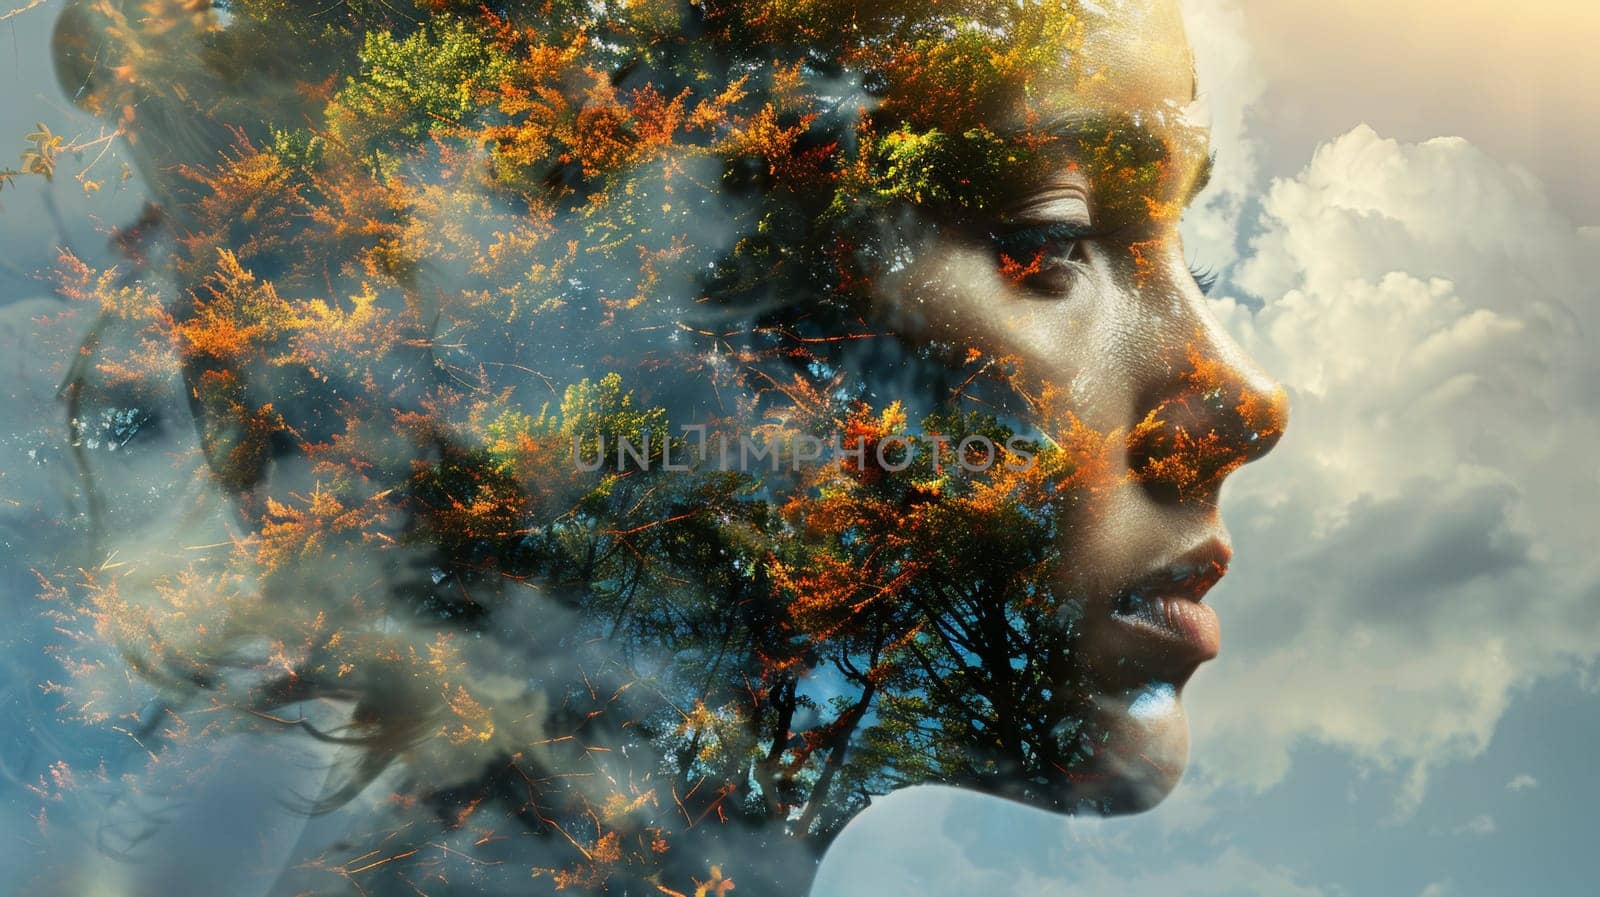 A woman's face with trees and leaves in the background